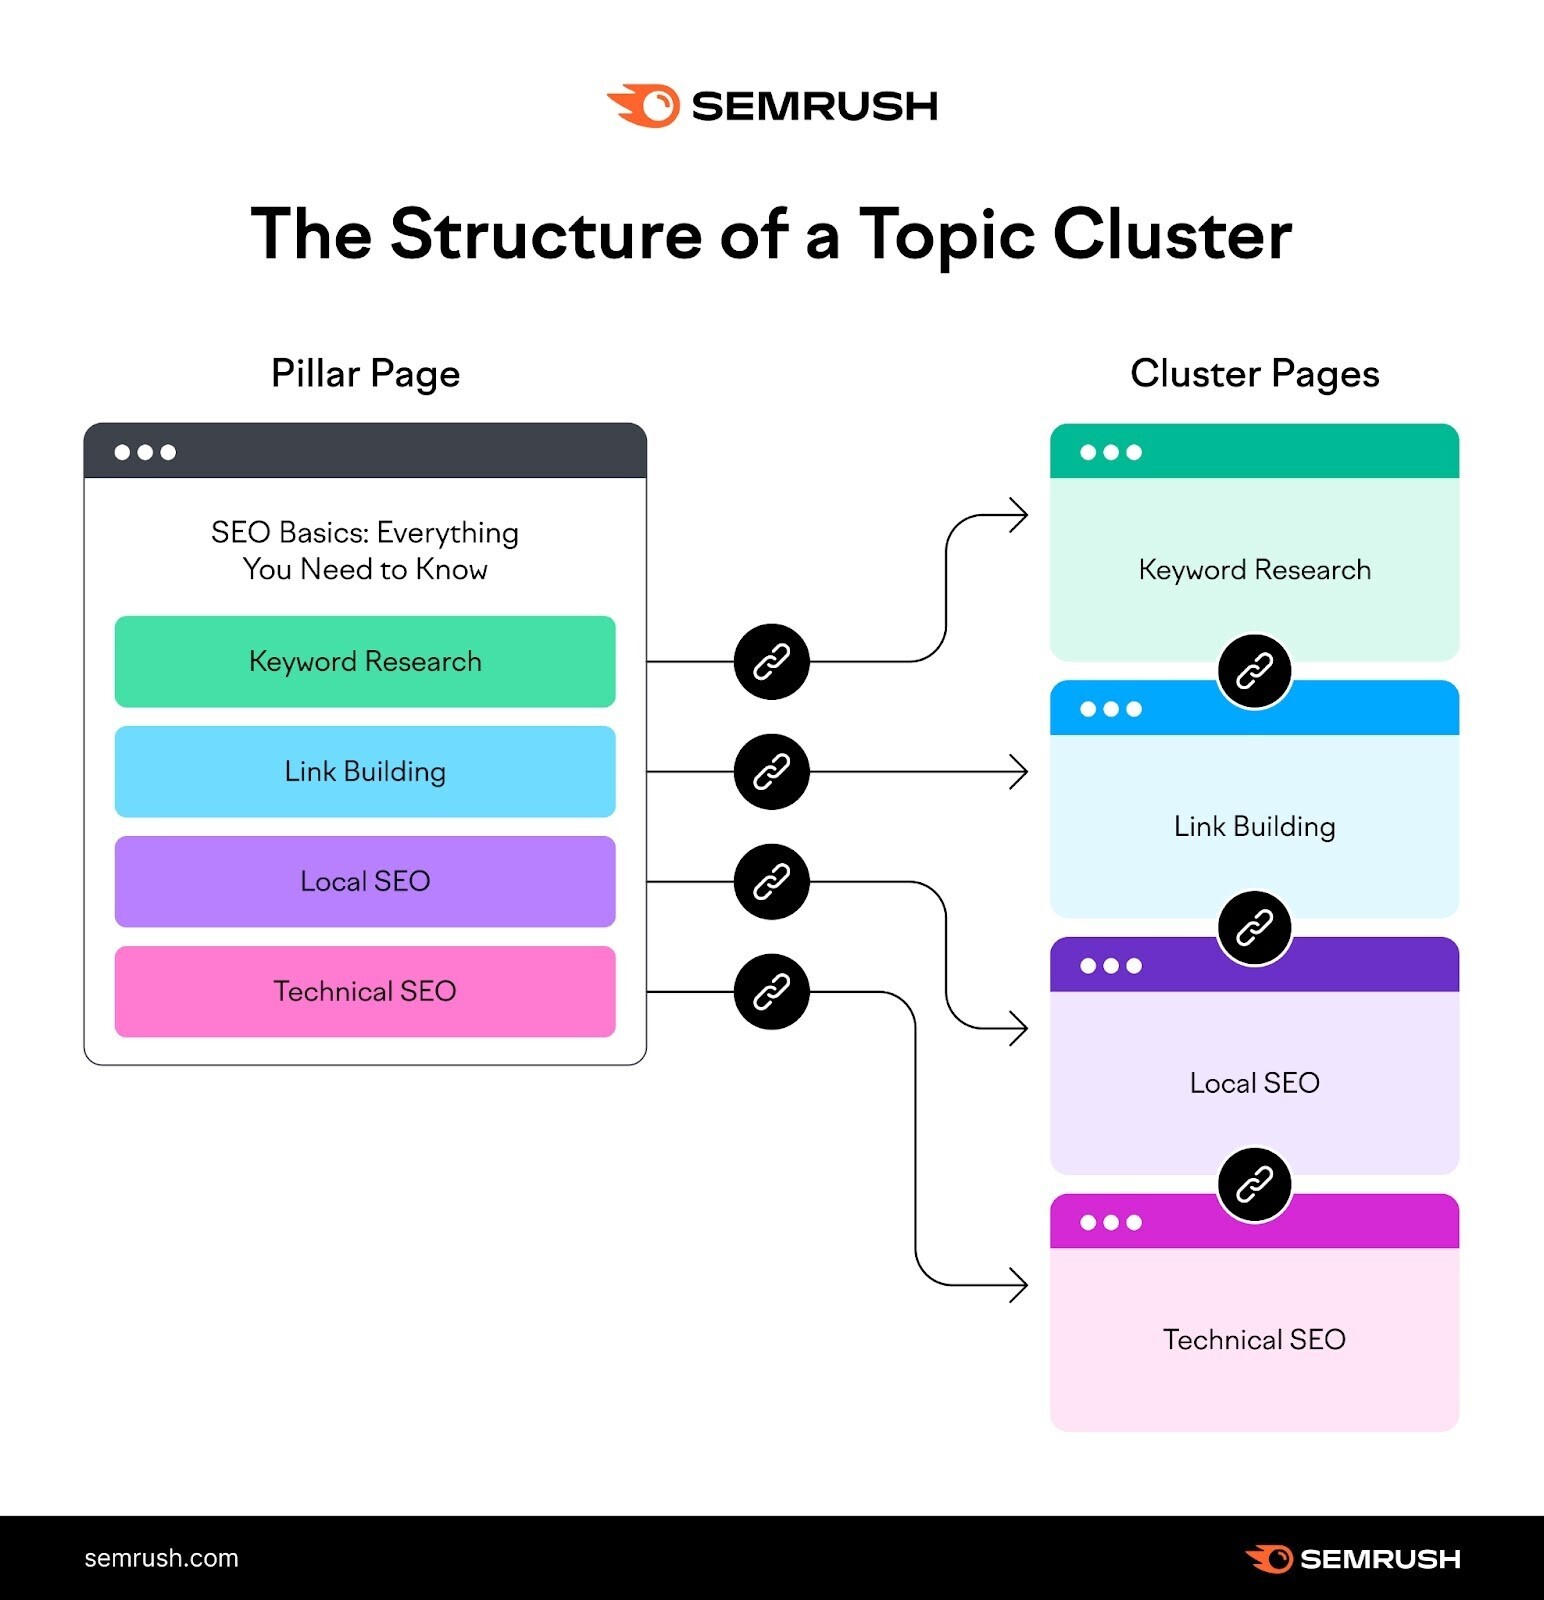 "The structure of a topic cluster" infographic by Semrush